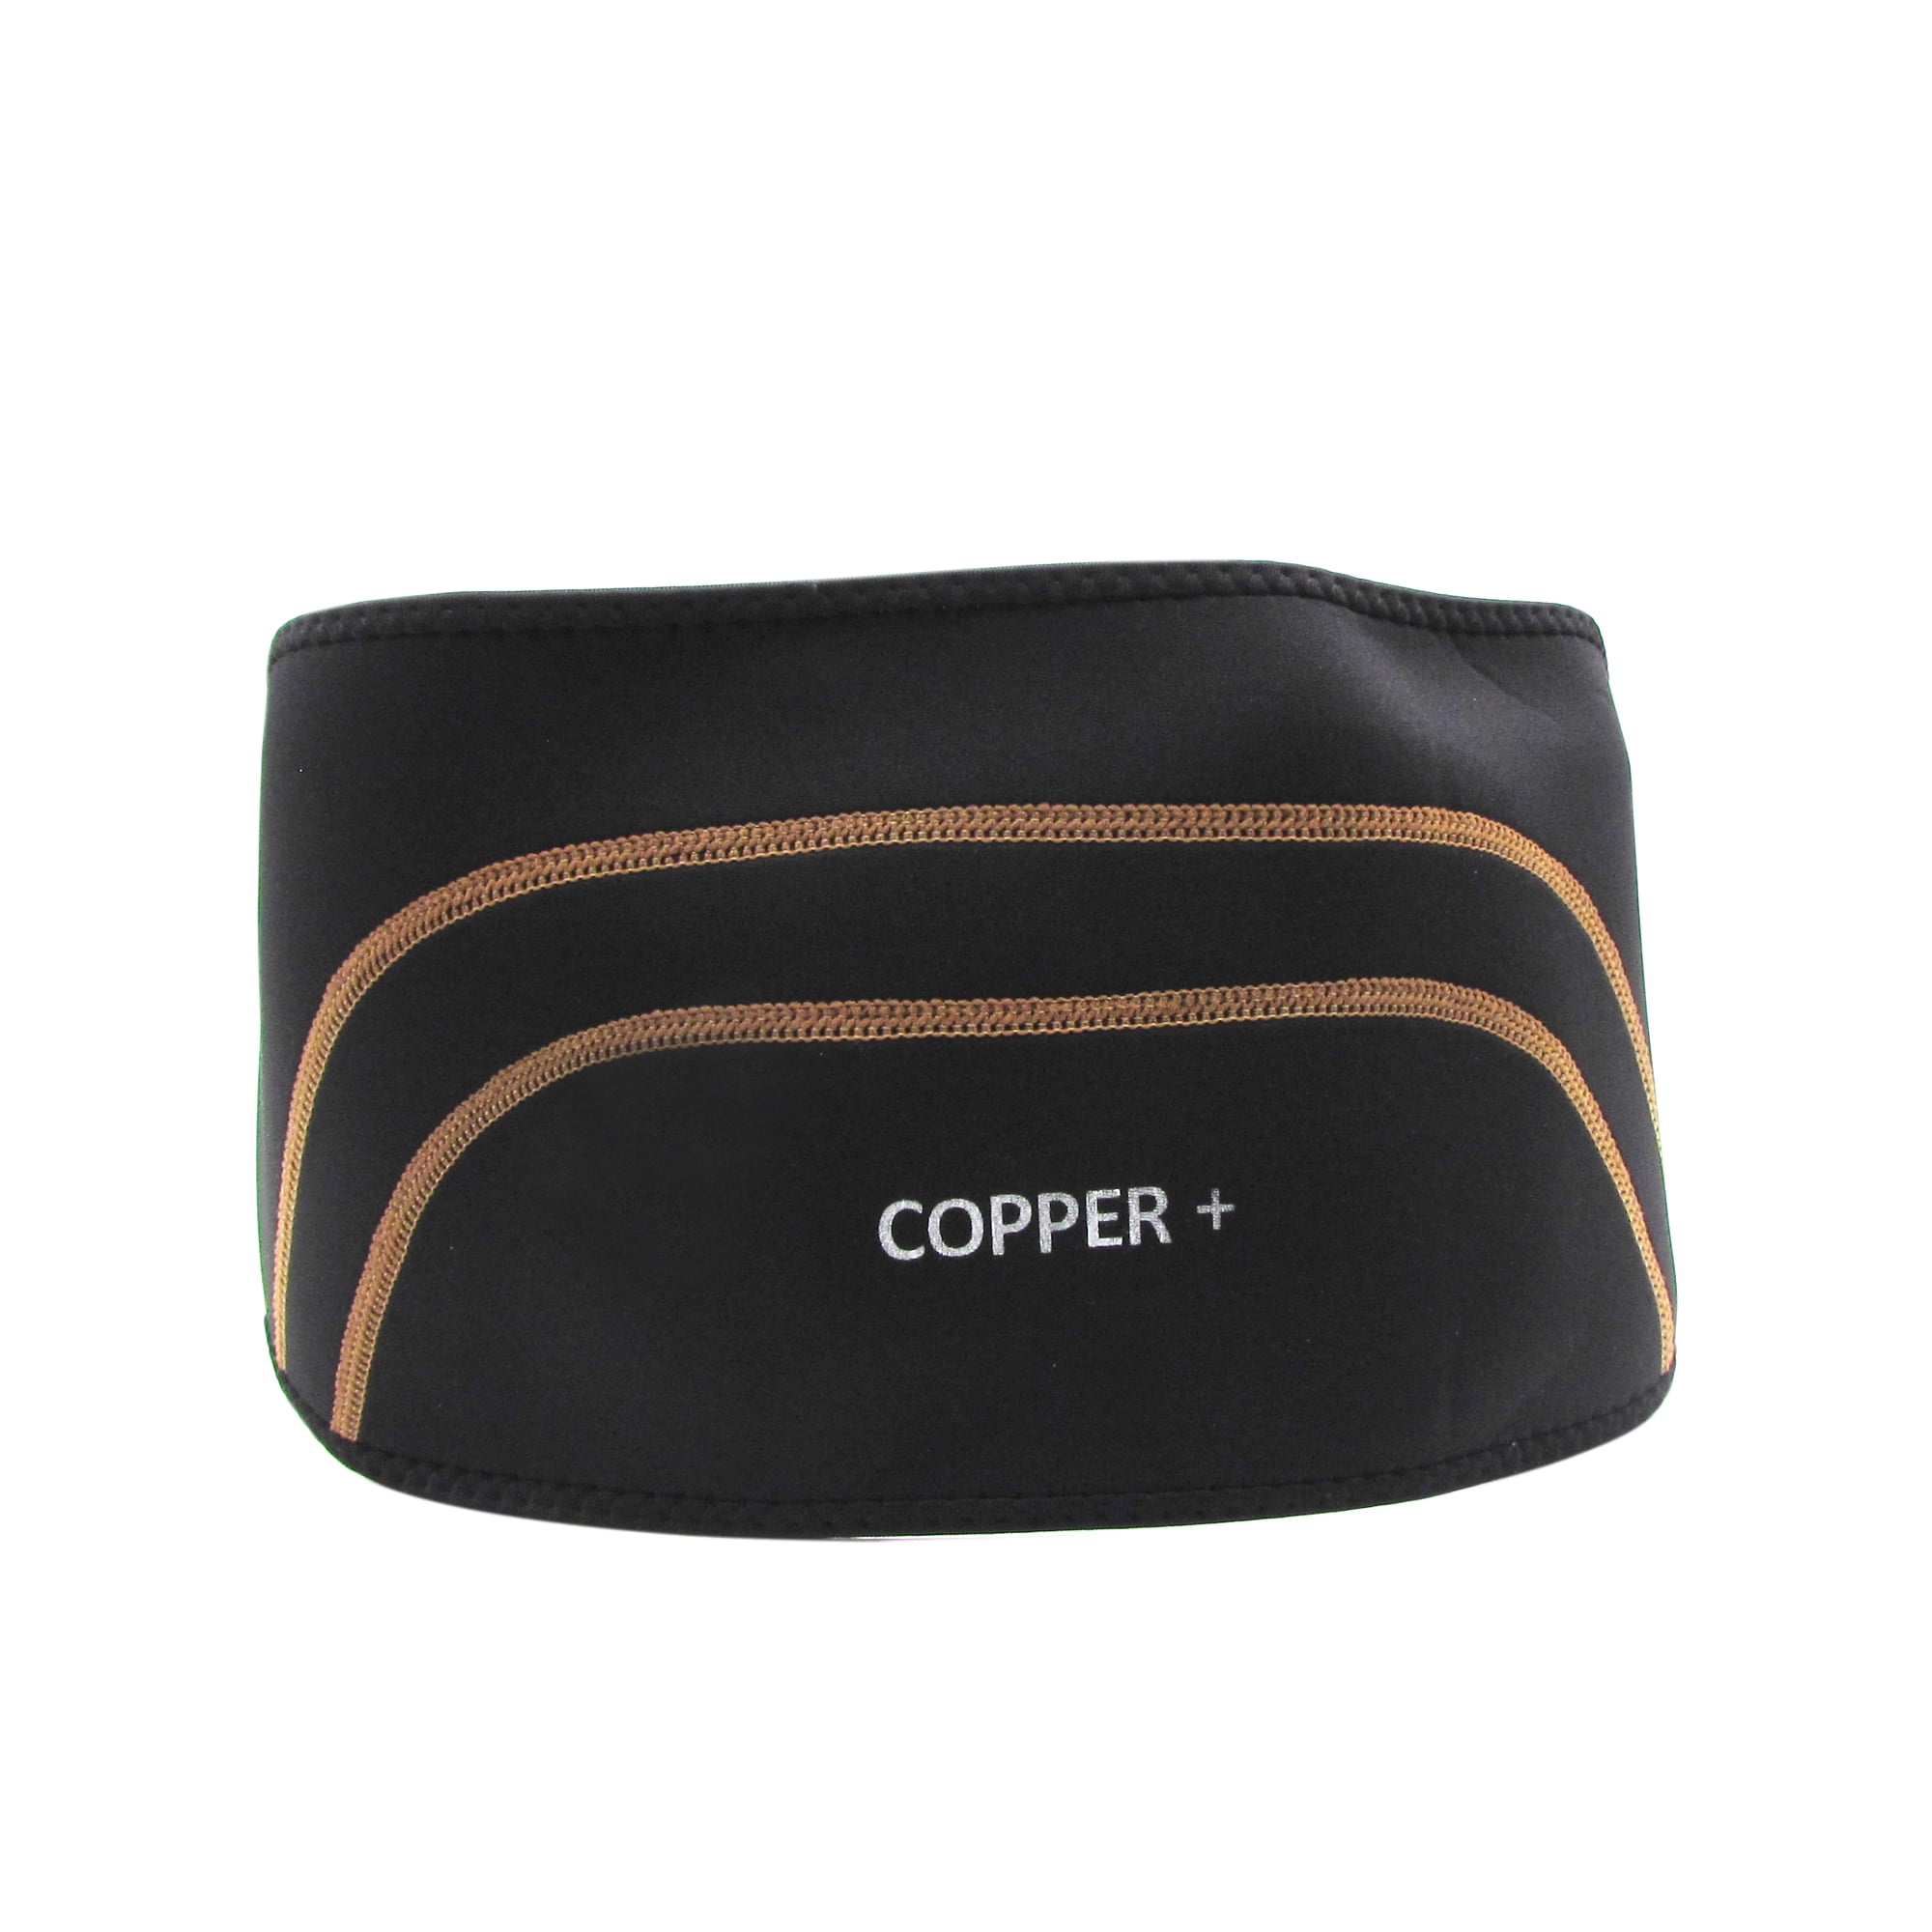 Saver's Selection Copper Compression Recovery Back Brace - #1 Guaranteed  Highest Copper Content with Infused Fit. Lower Back Lumbar Support Belt,  back pain support